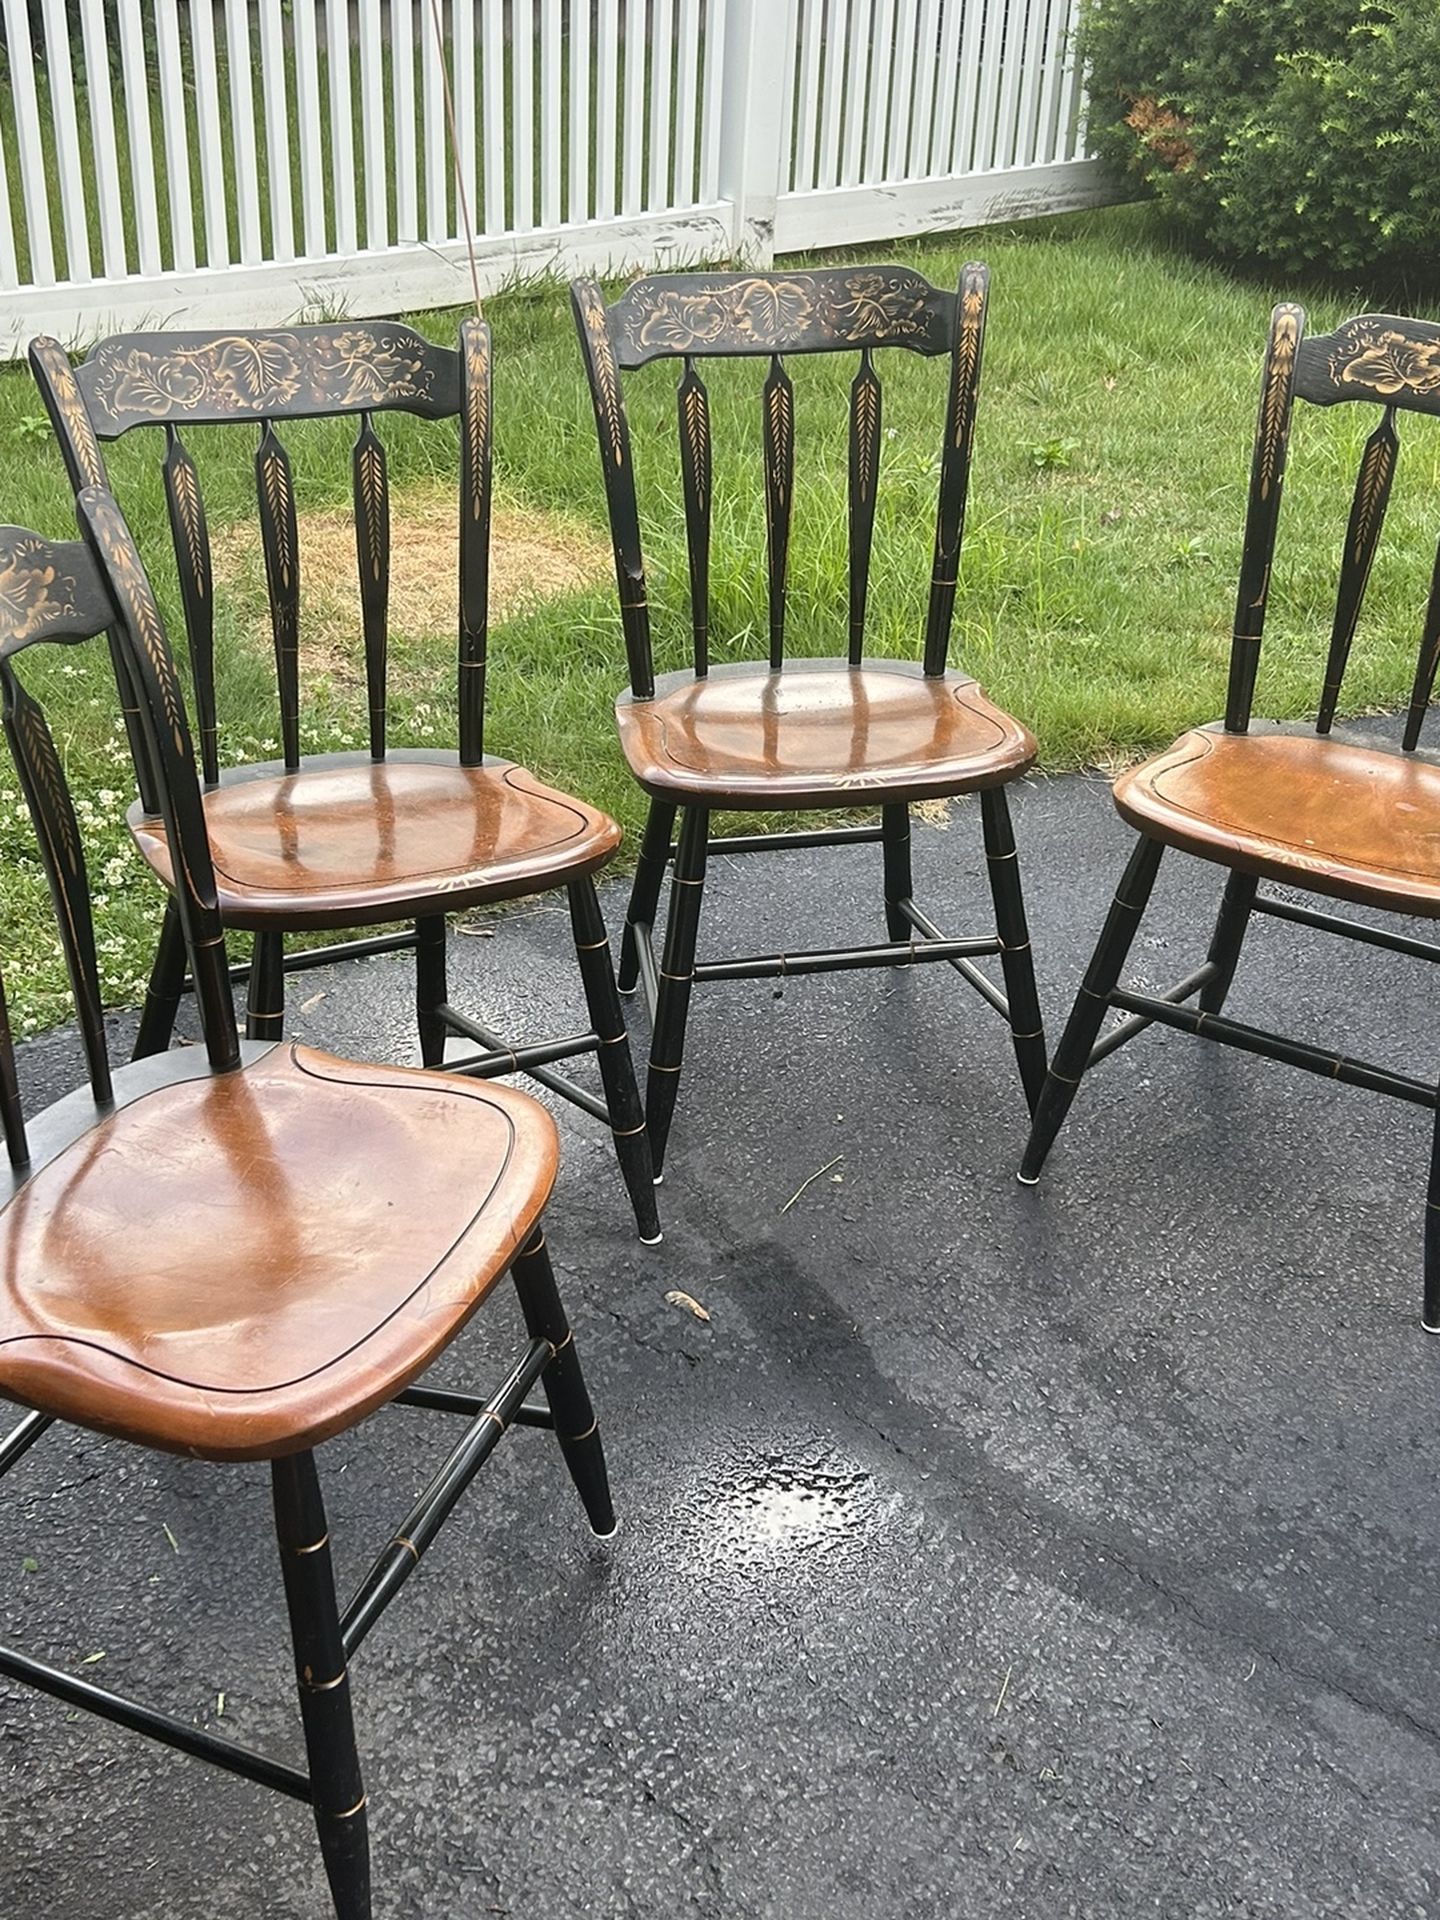 4 Hitchcock Chairs And Wooden Table $200